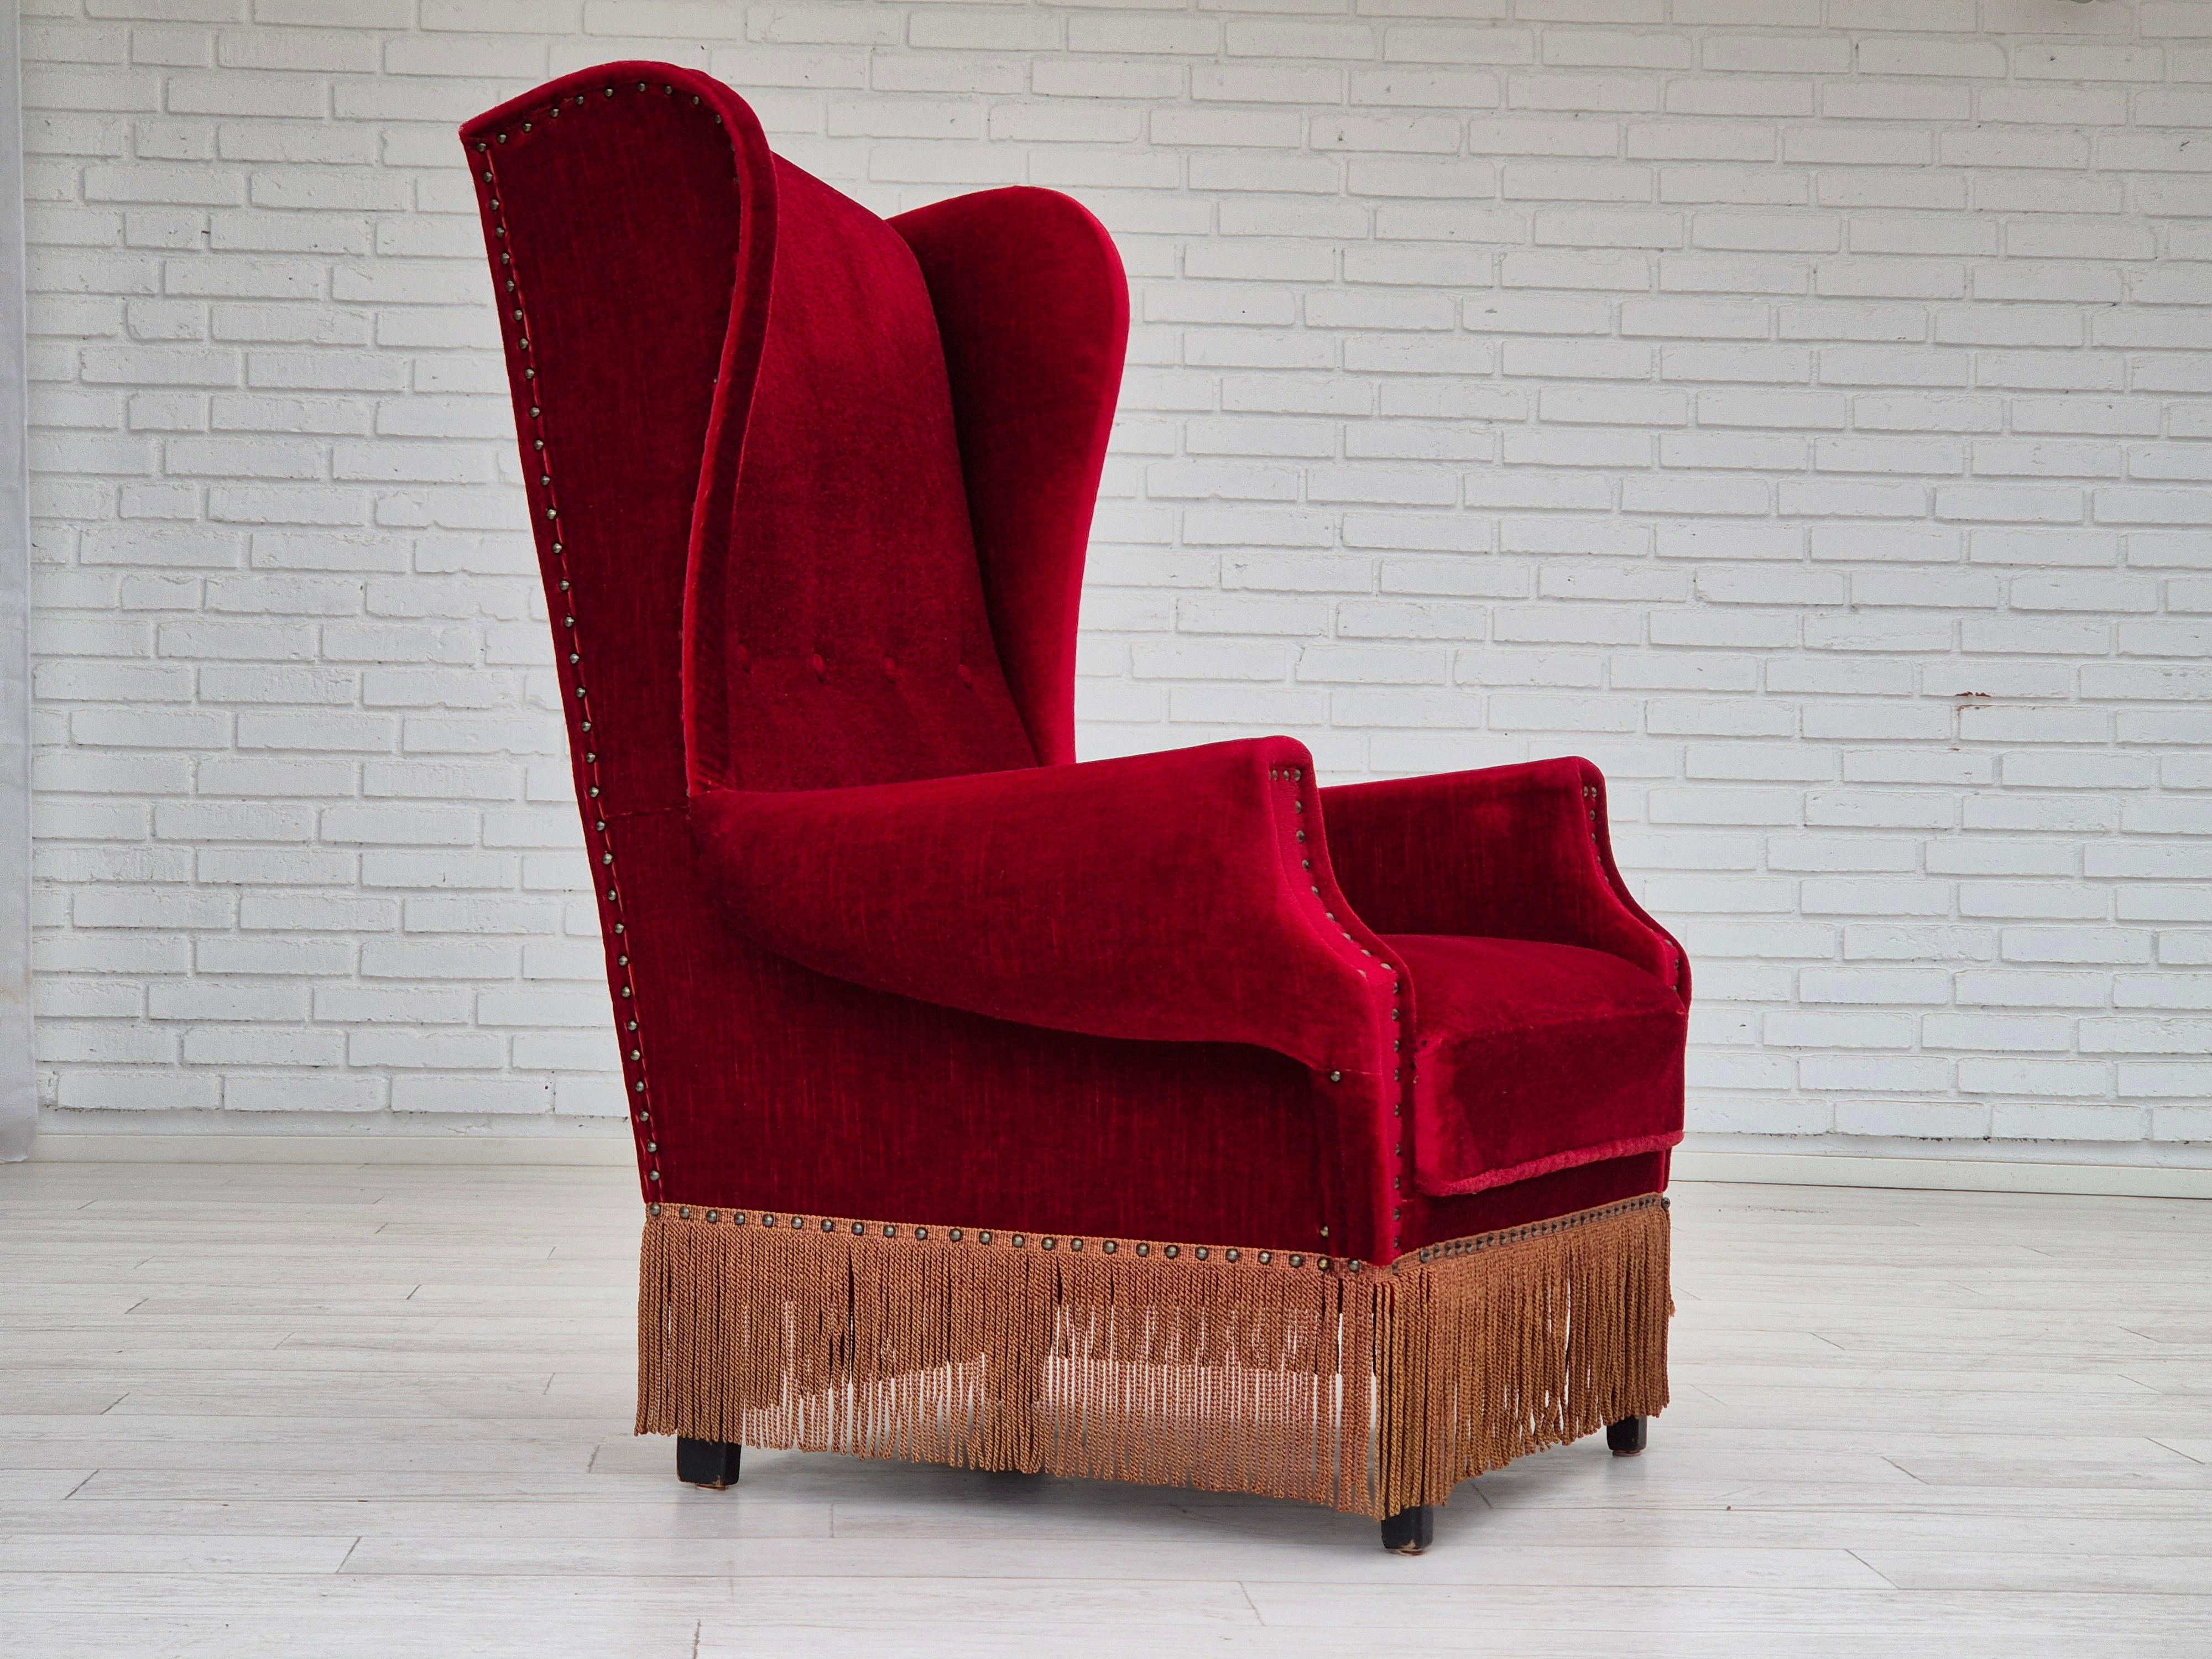 1960s, Danish wingback armchair in original very good condition: no smells and no stains. Cherry-red furniture velour, oak wood legs. Springs in the seat. Manufactured by Danish furniture manufacturer in about 1960s.